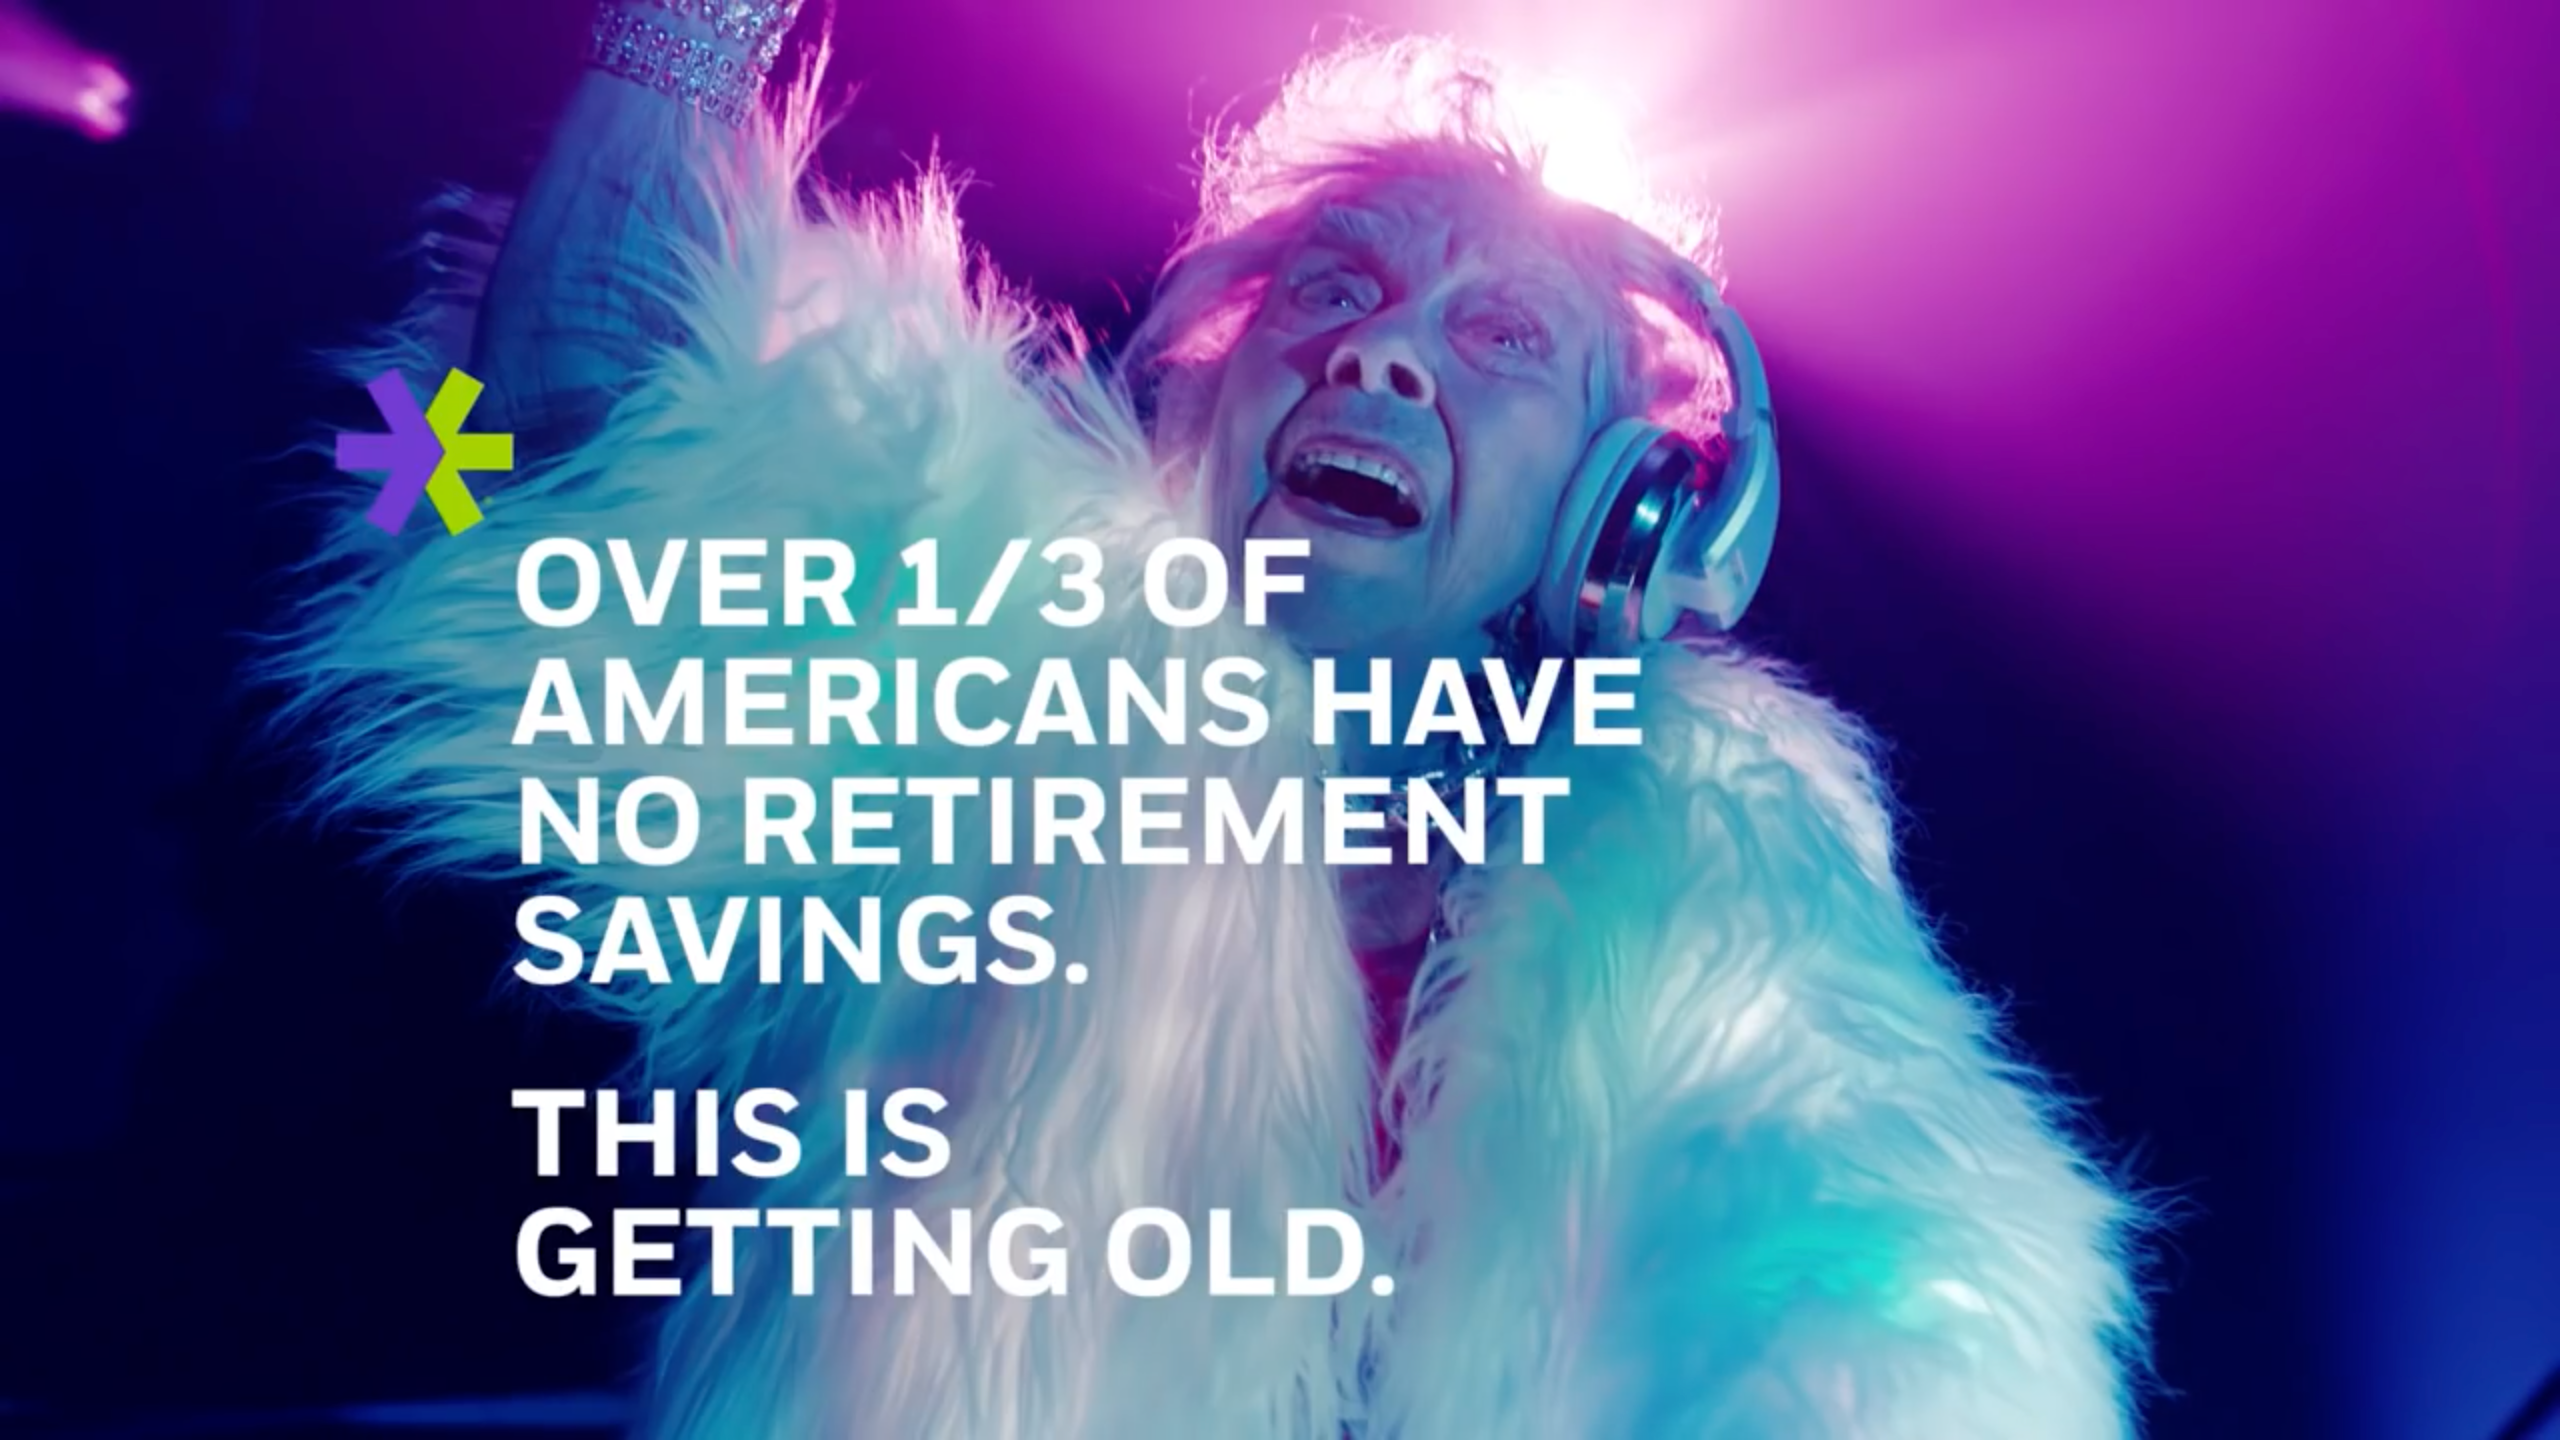 The Scary Truth Behind That E*Trade Super Bowl Retirement Commercial